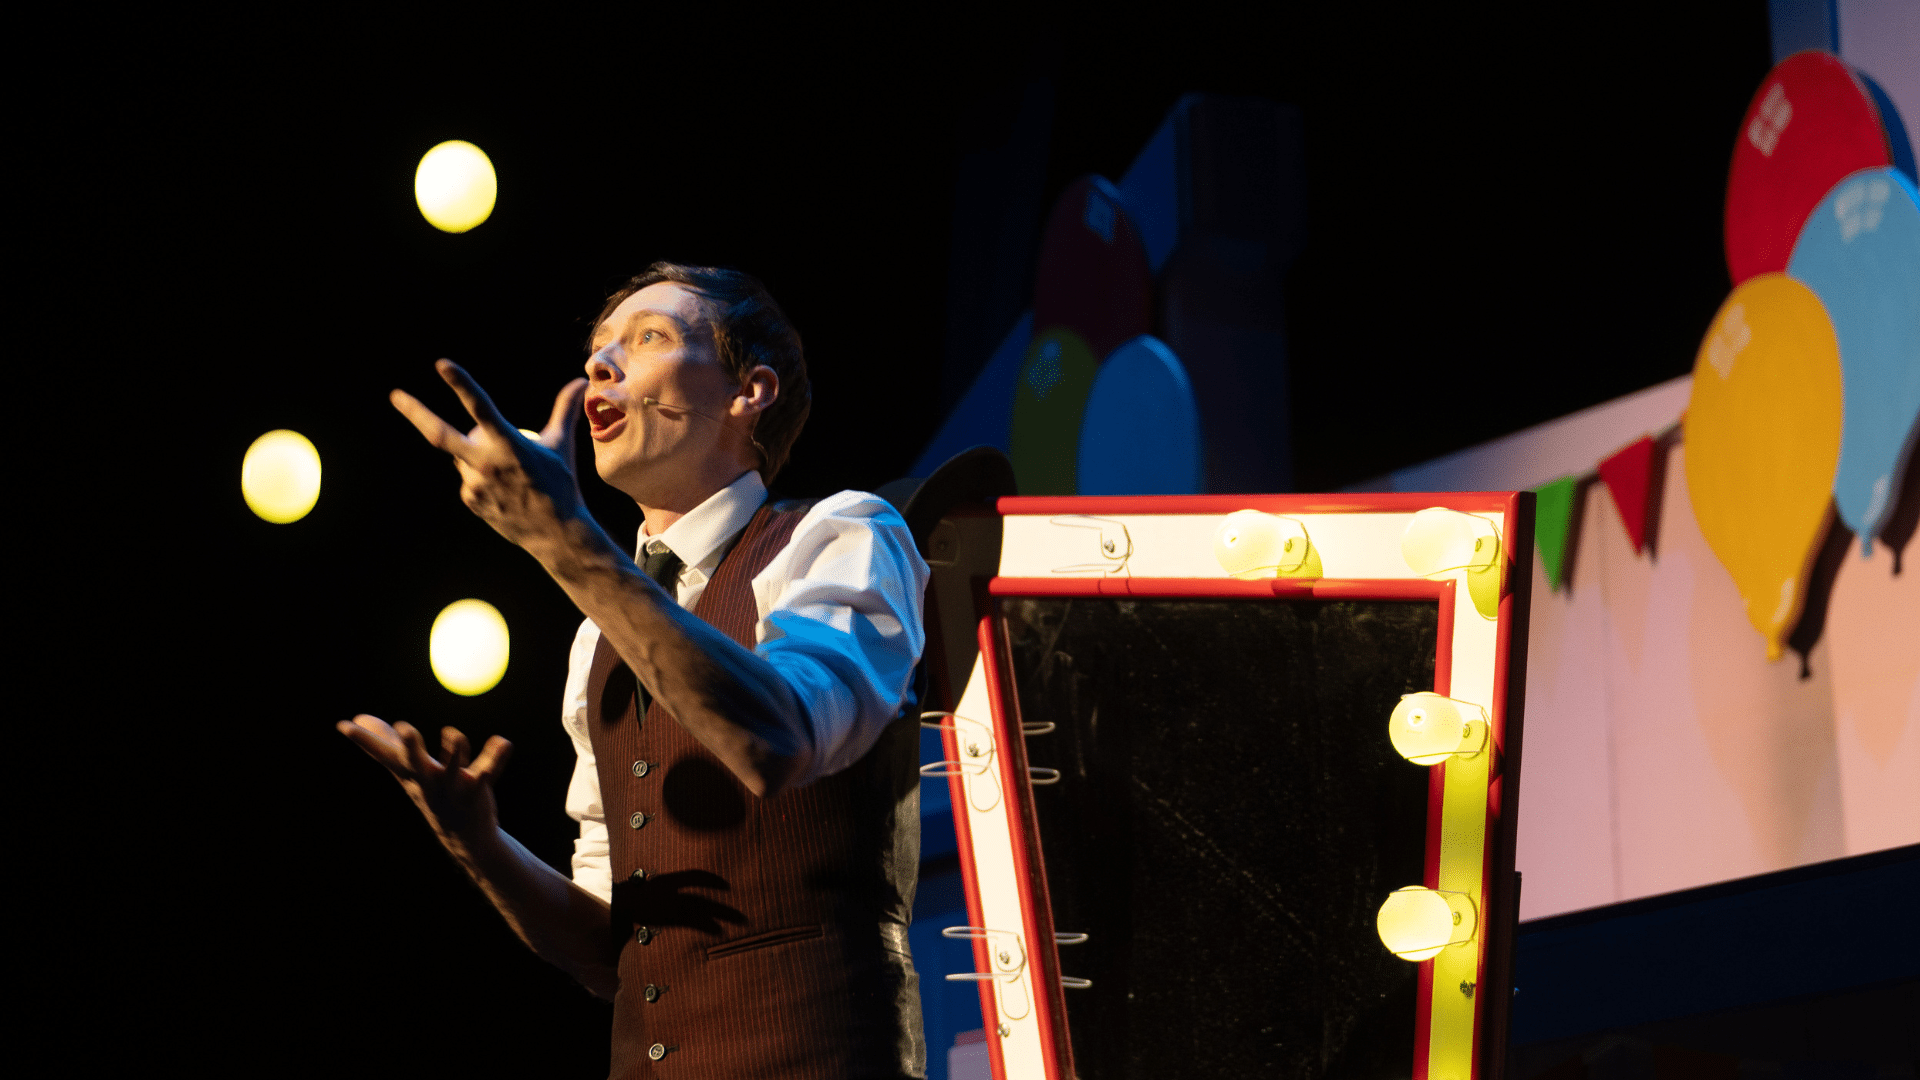 The Sooty Show production image: a man in a brown pinstriped suit stands in front of a dressing-room mirror on stage and gestures towards an off-camera audience.